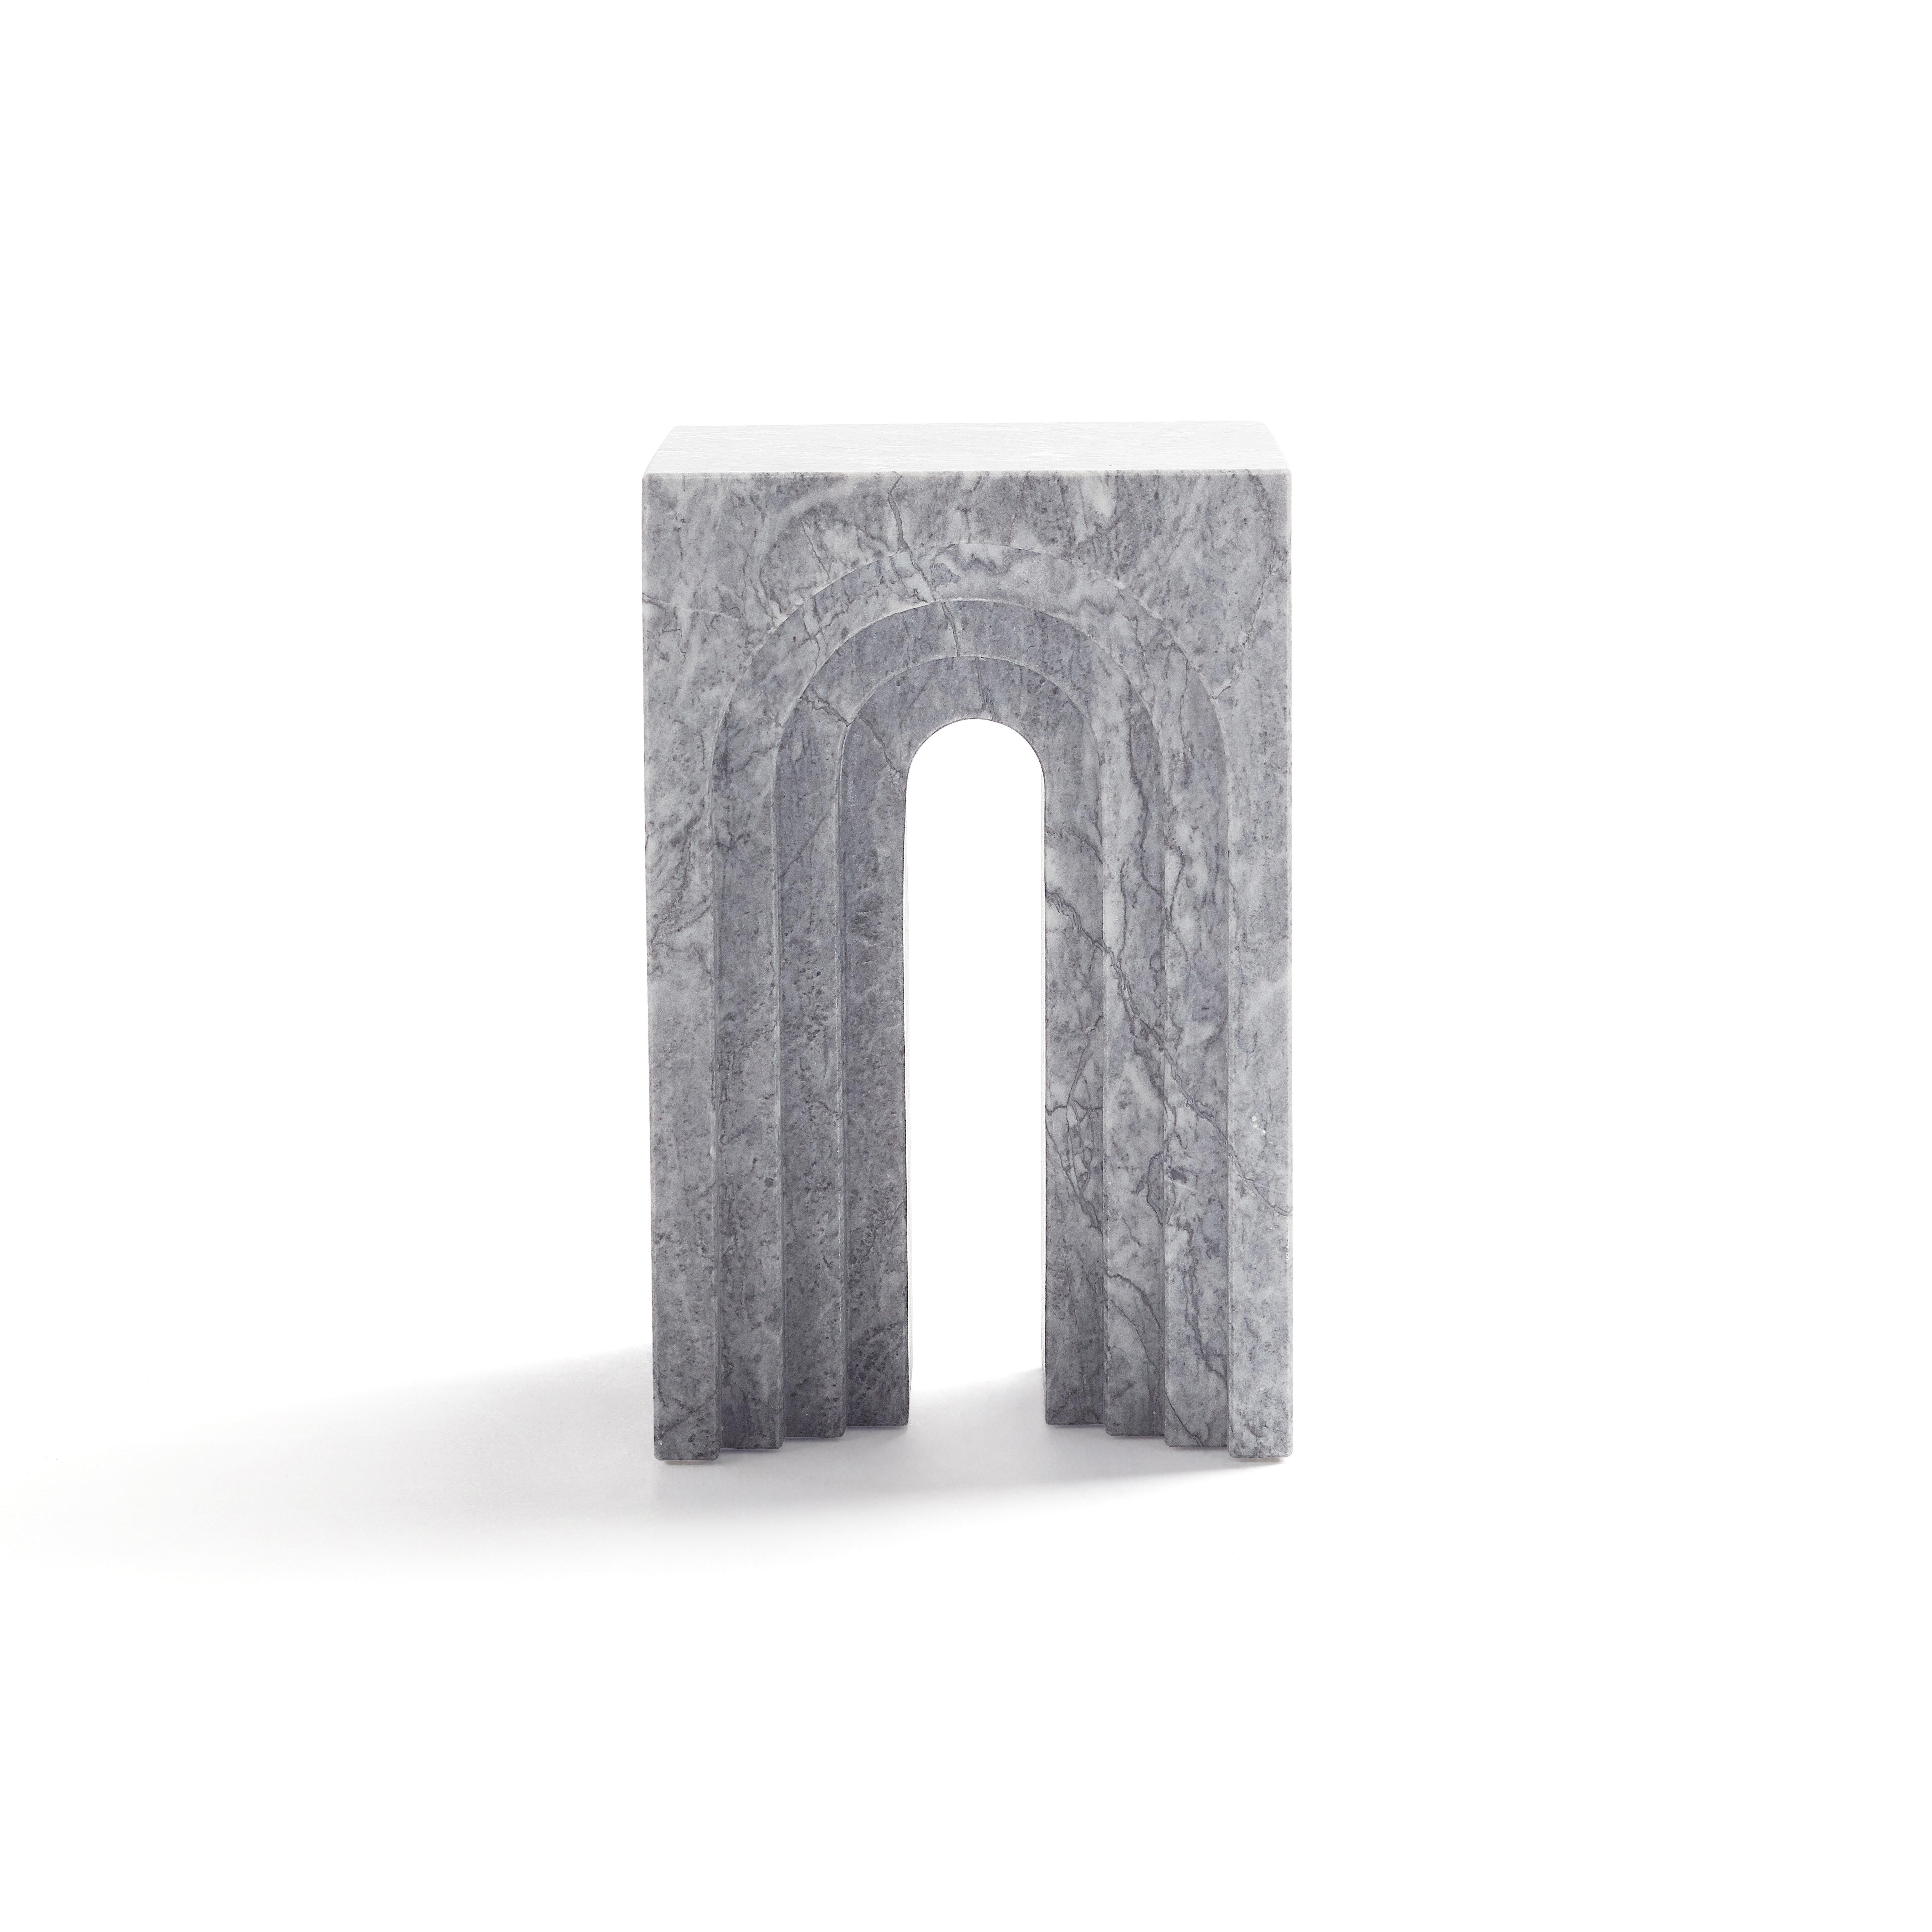 Portico is a robust, brutalist, minimalist and eternal stool/side table. The arches created by the doors on both sides, concentrate the light in a central point, and gives the viewer a poethic minimalist enlightening sense. Josep Vila Capdevila,